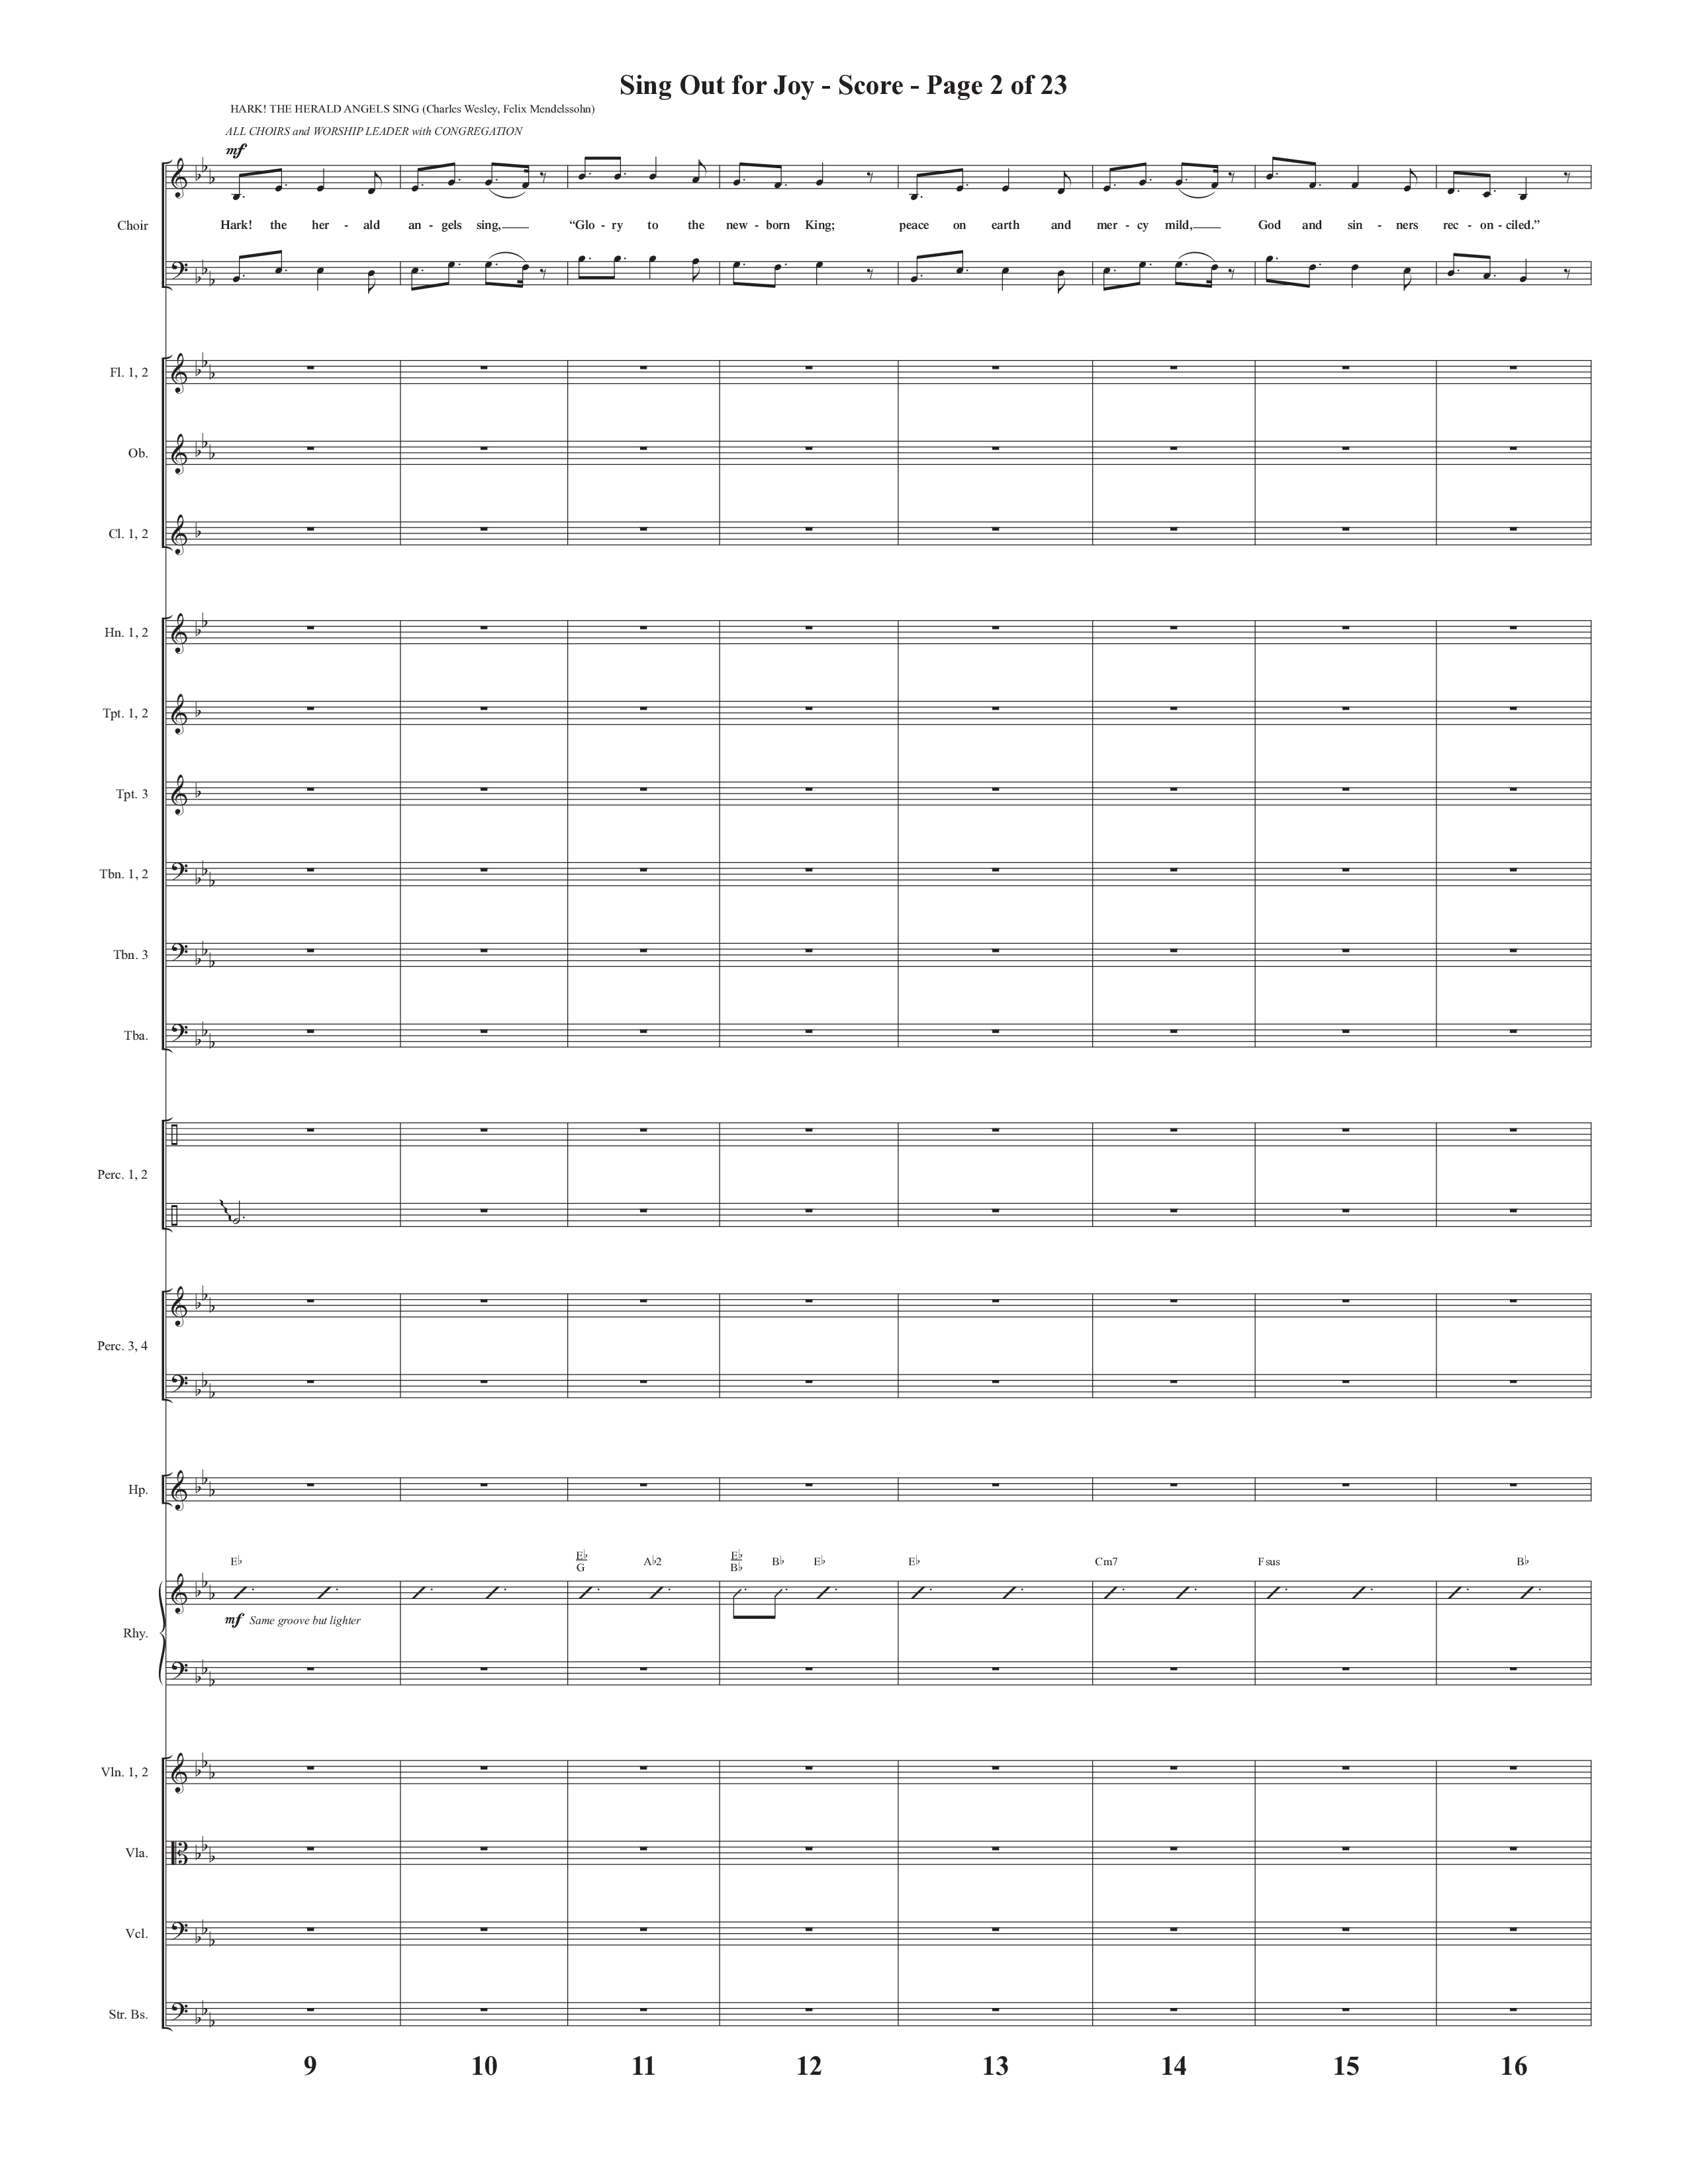 Sing Out For Joy (Choral Anthem SATB) Conductor's Score (Semsen Music / Arr. John Bolin / Orch. Cliff Duren)